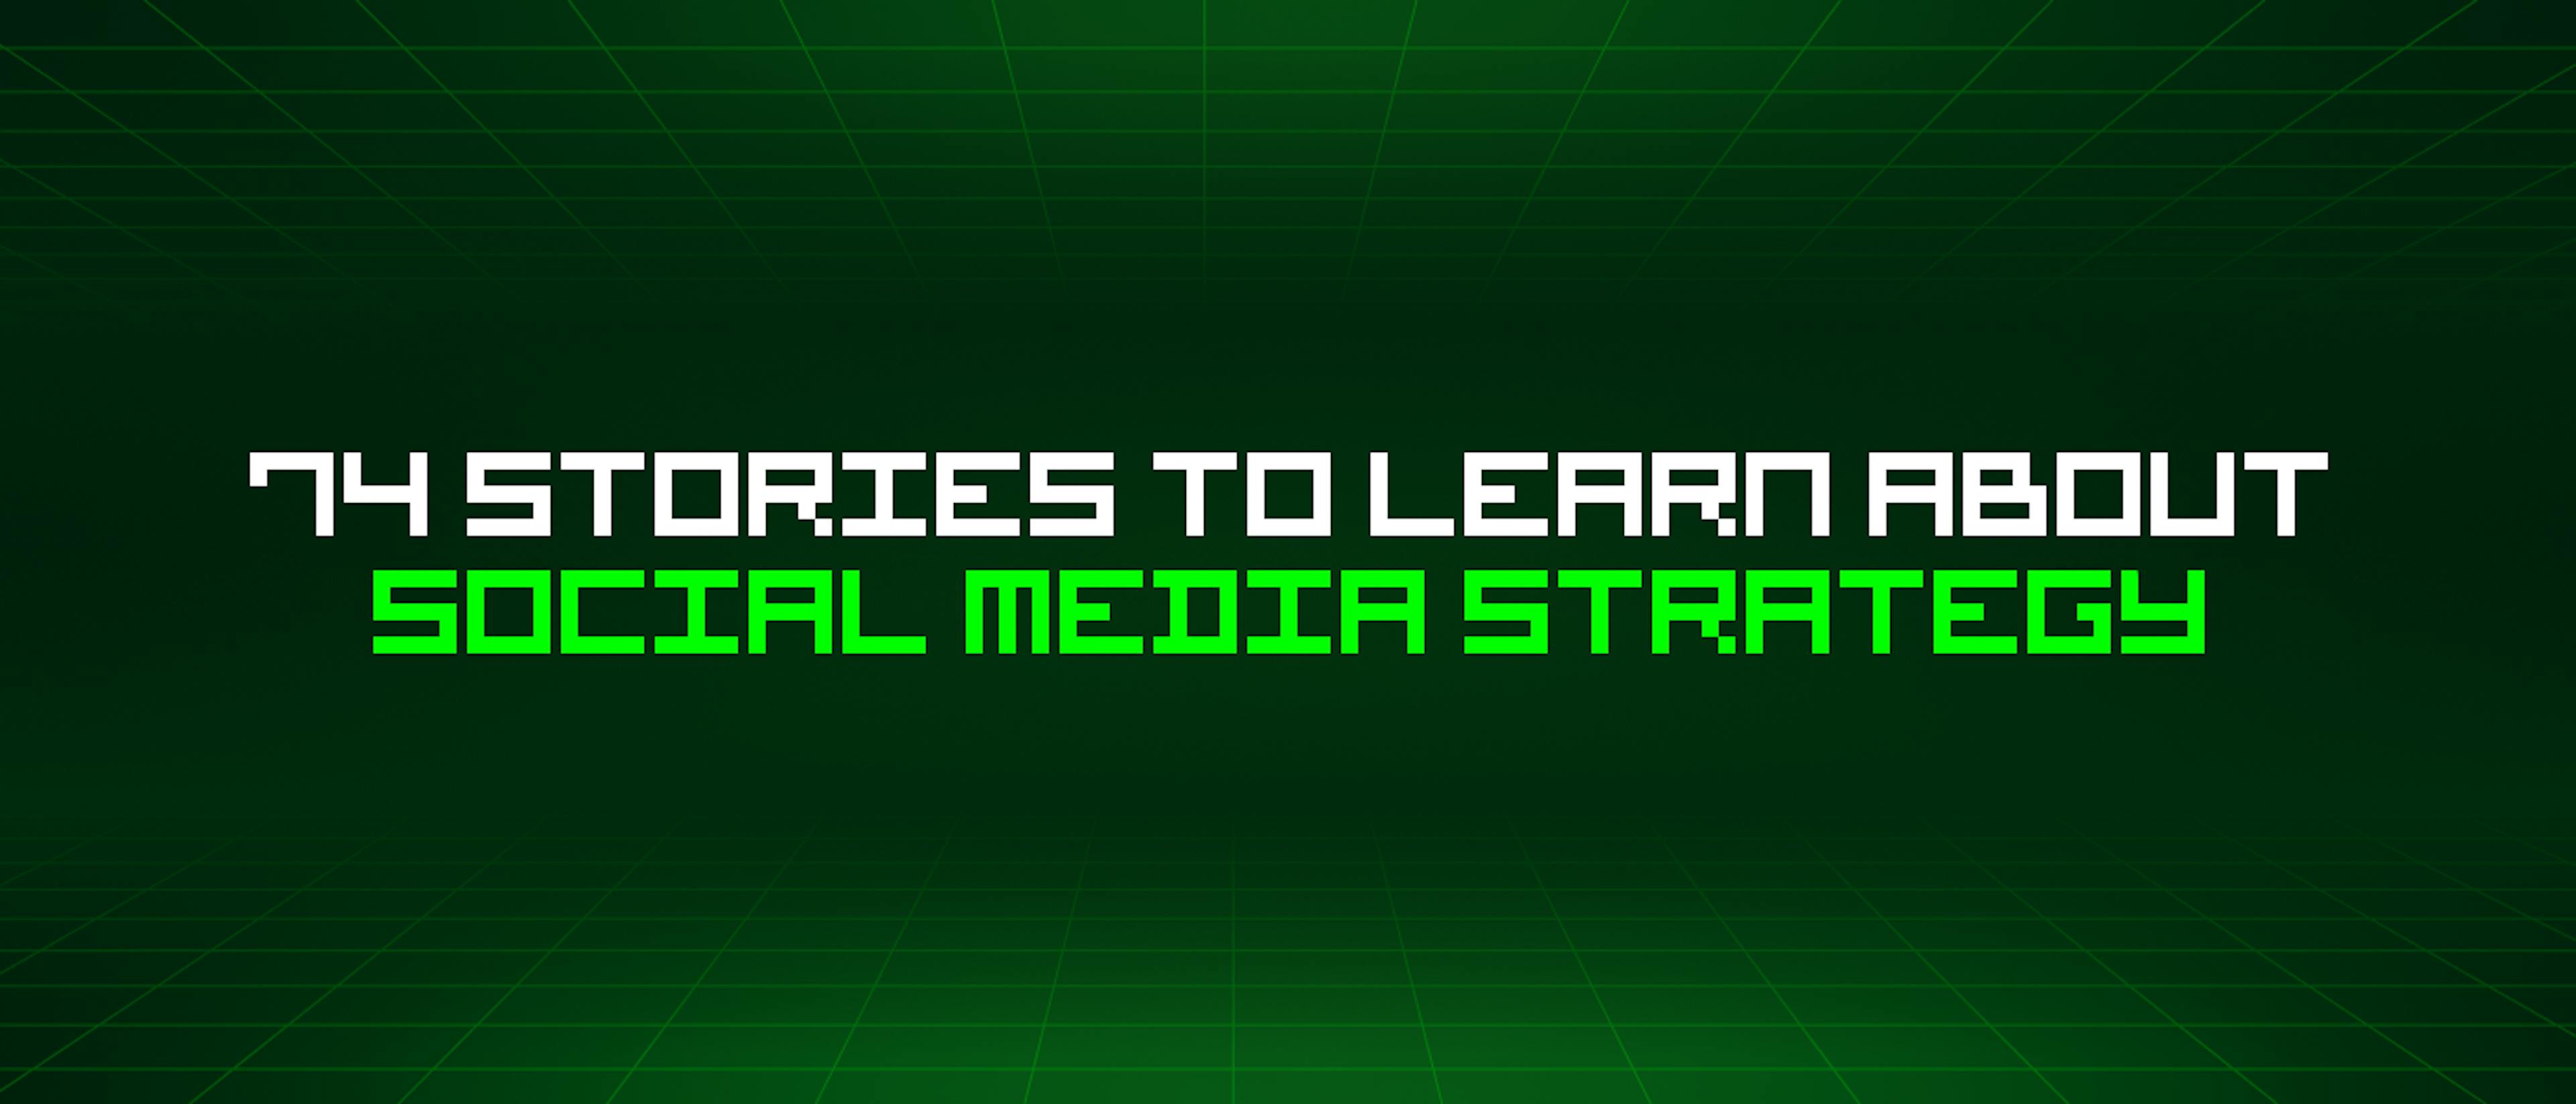 featured image - 74 Stories To Learn About Social Media Strategy